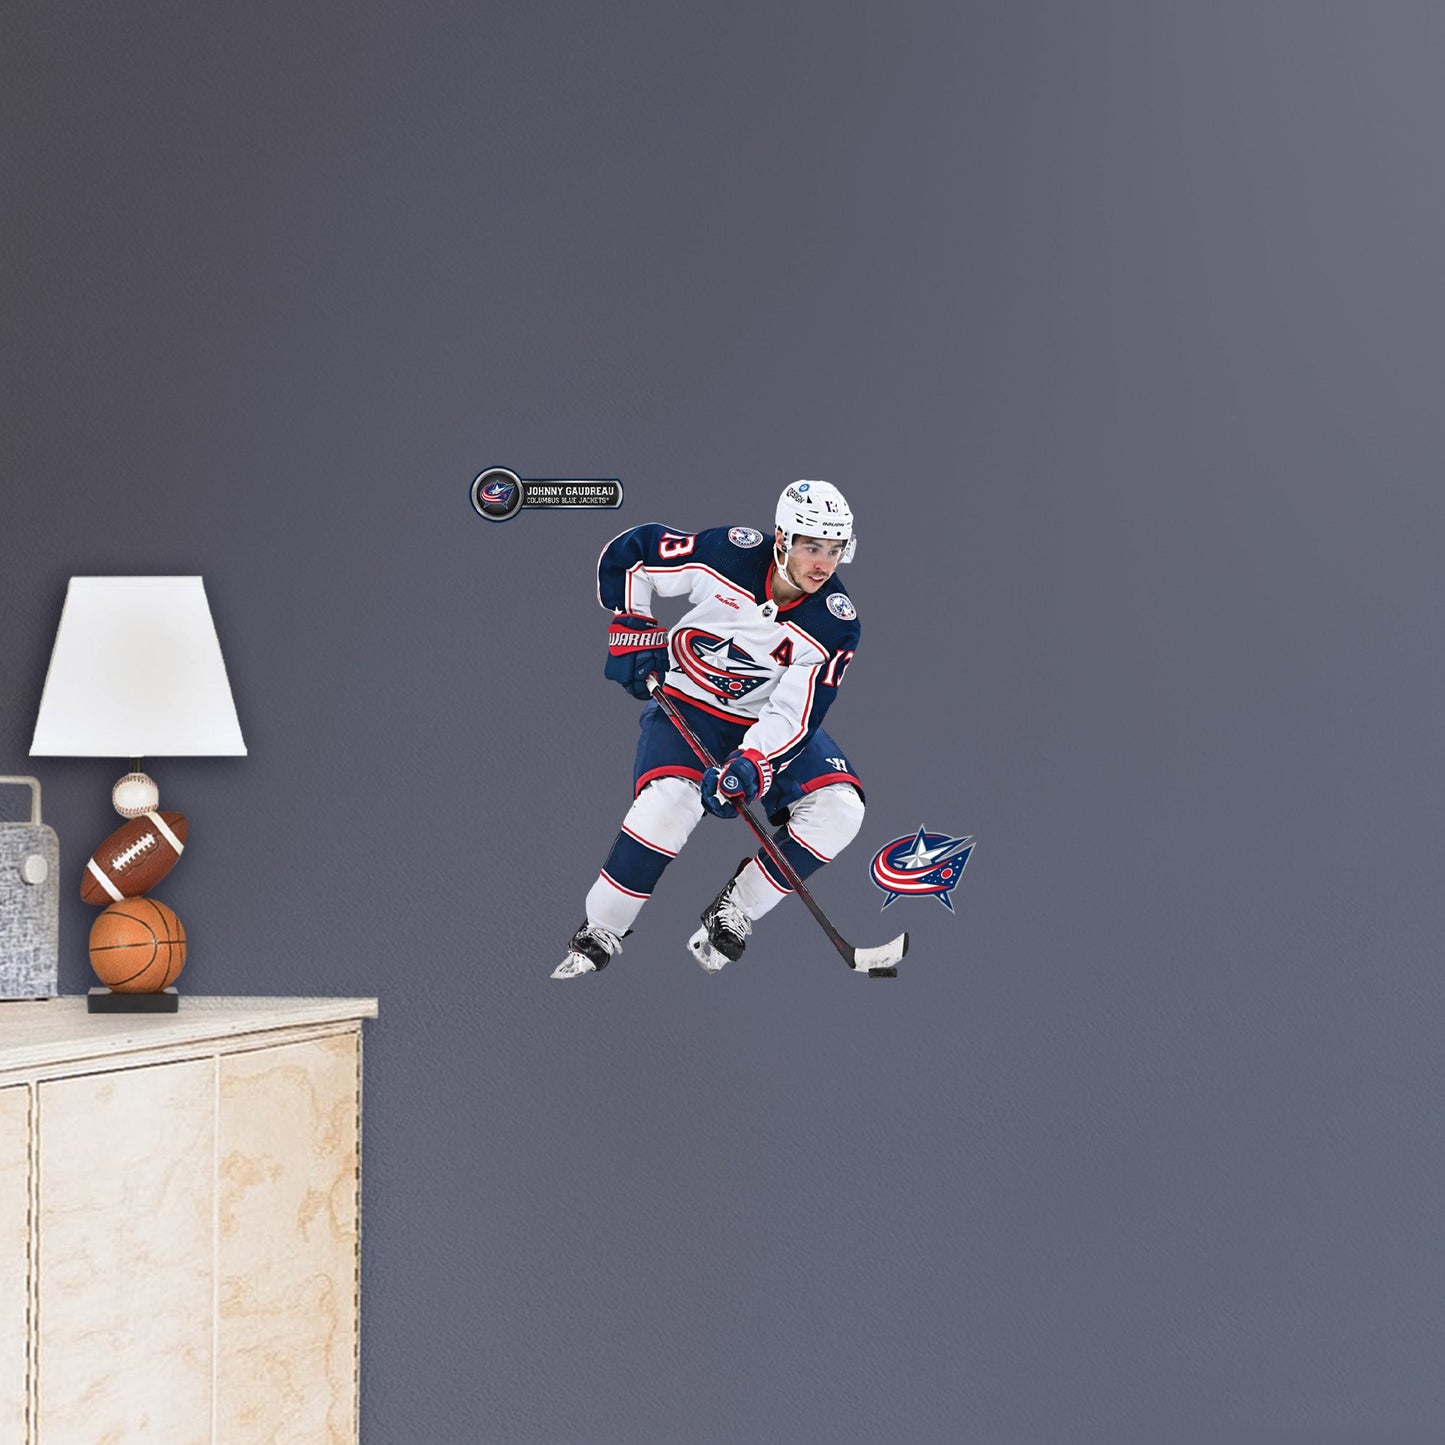 Columbus Blue Jackets: Johnny Gaudreau - Officially Licensed NHL Removable Adhesive Decal